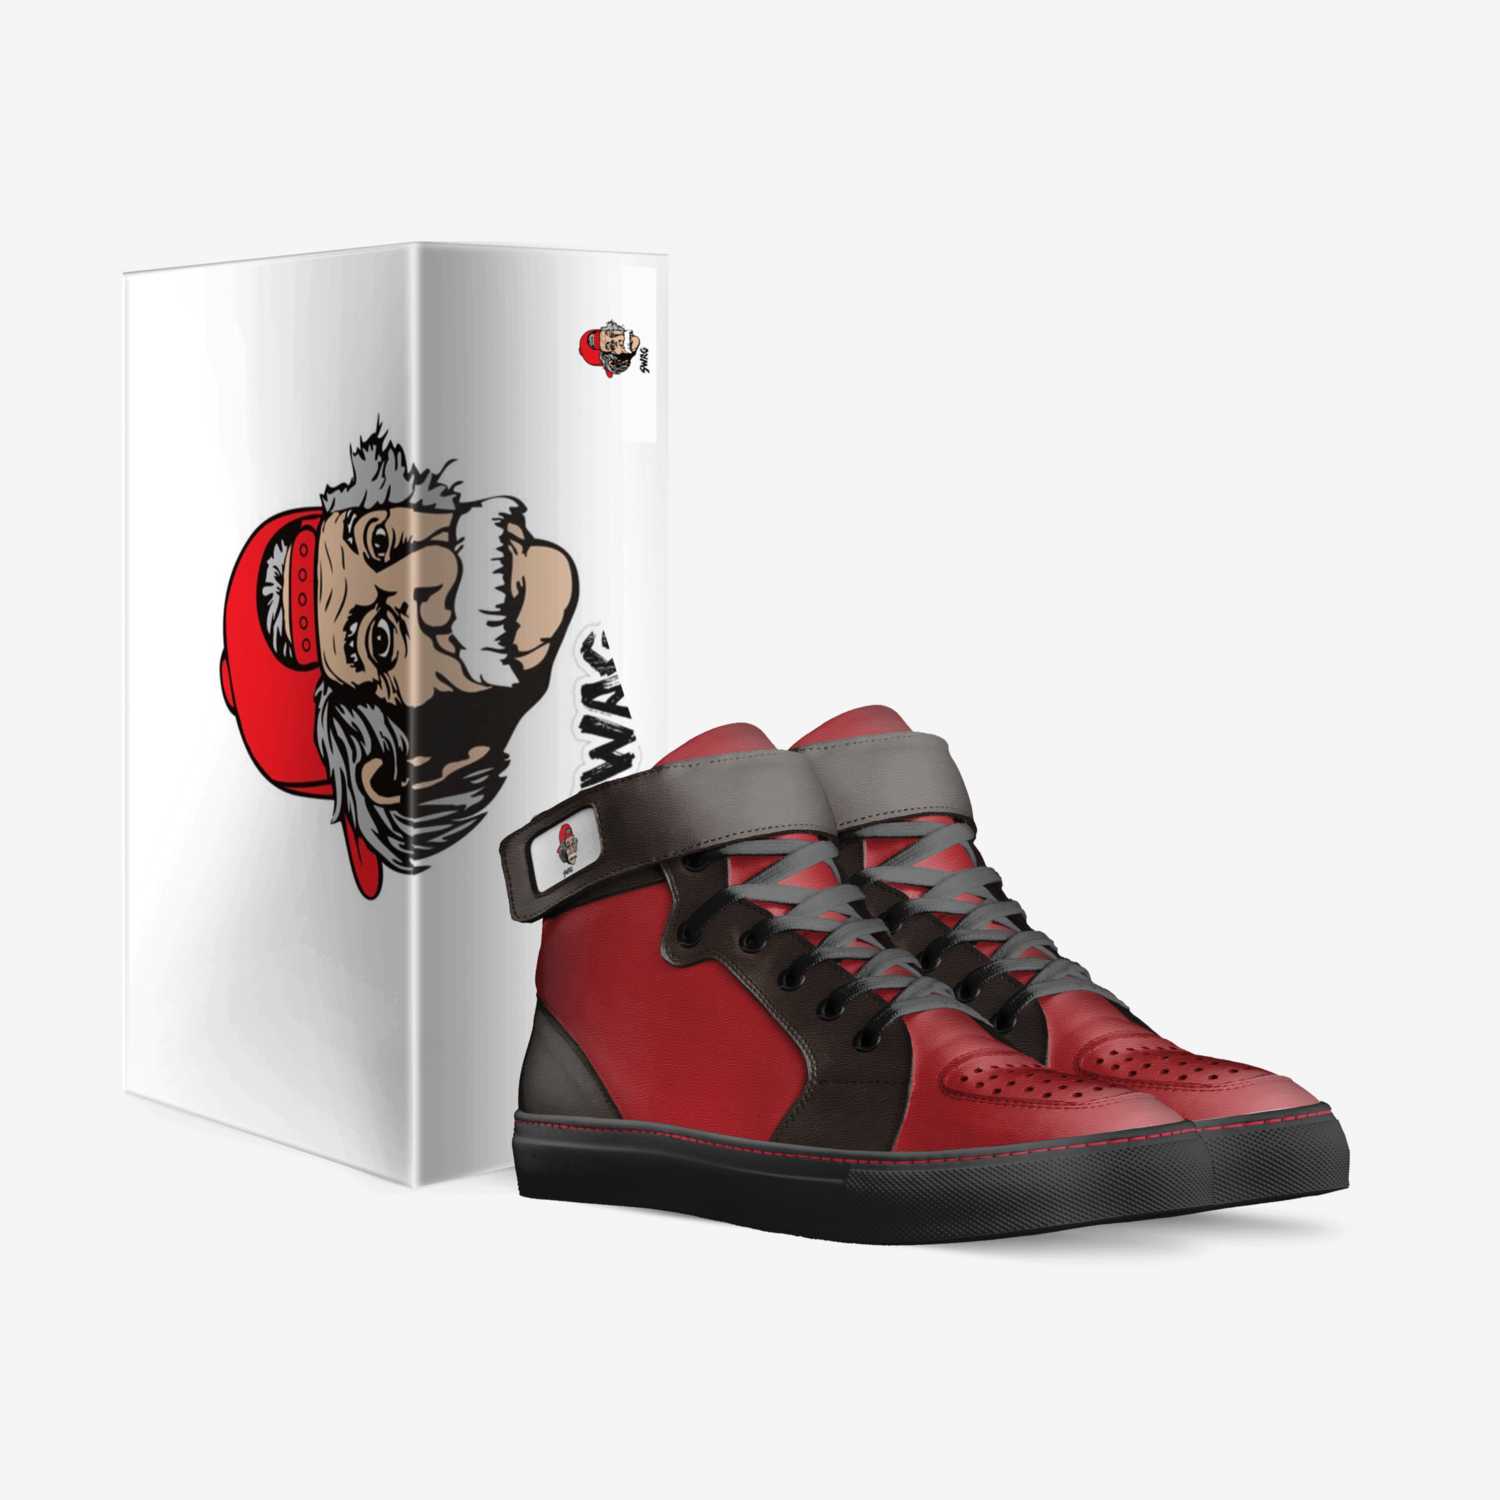 Dropouts custom made in Italy shoes by David | Box view